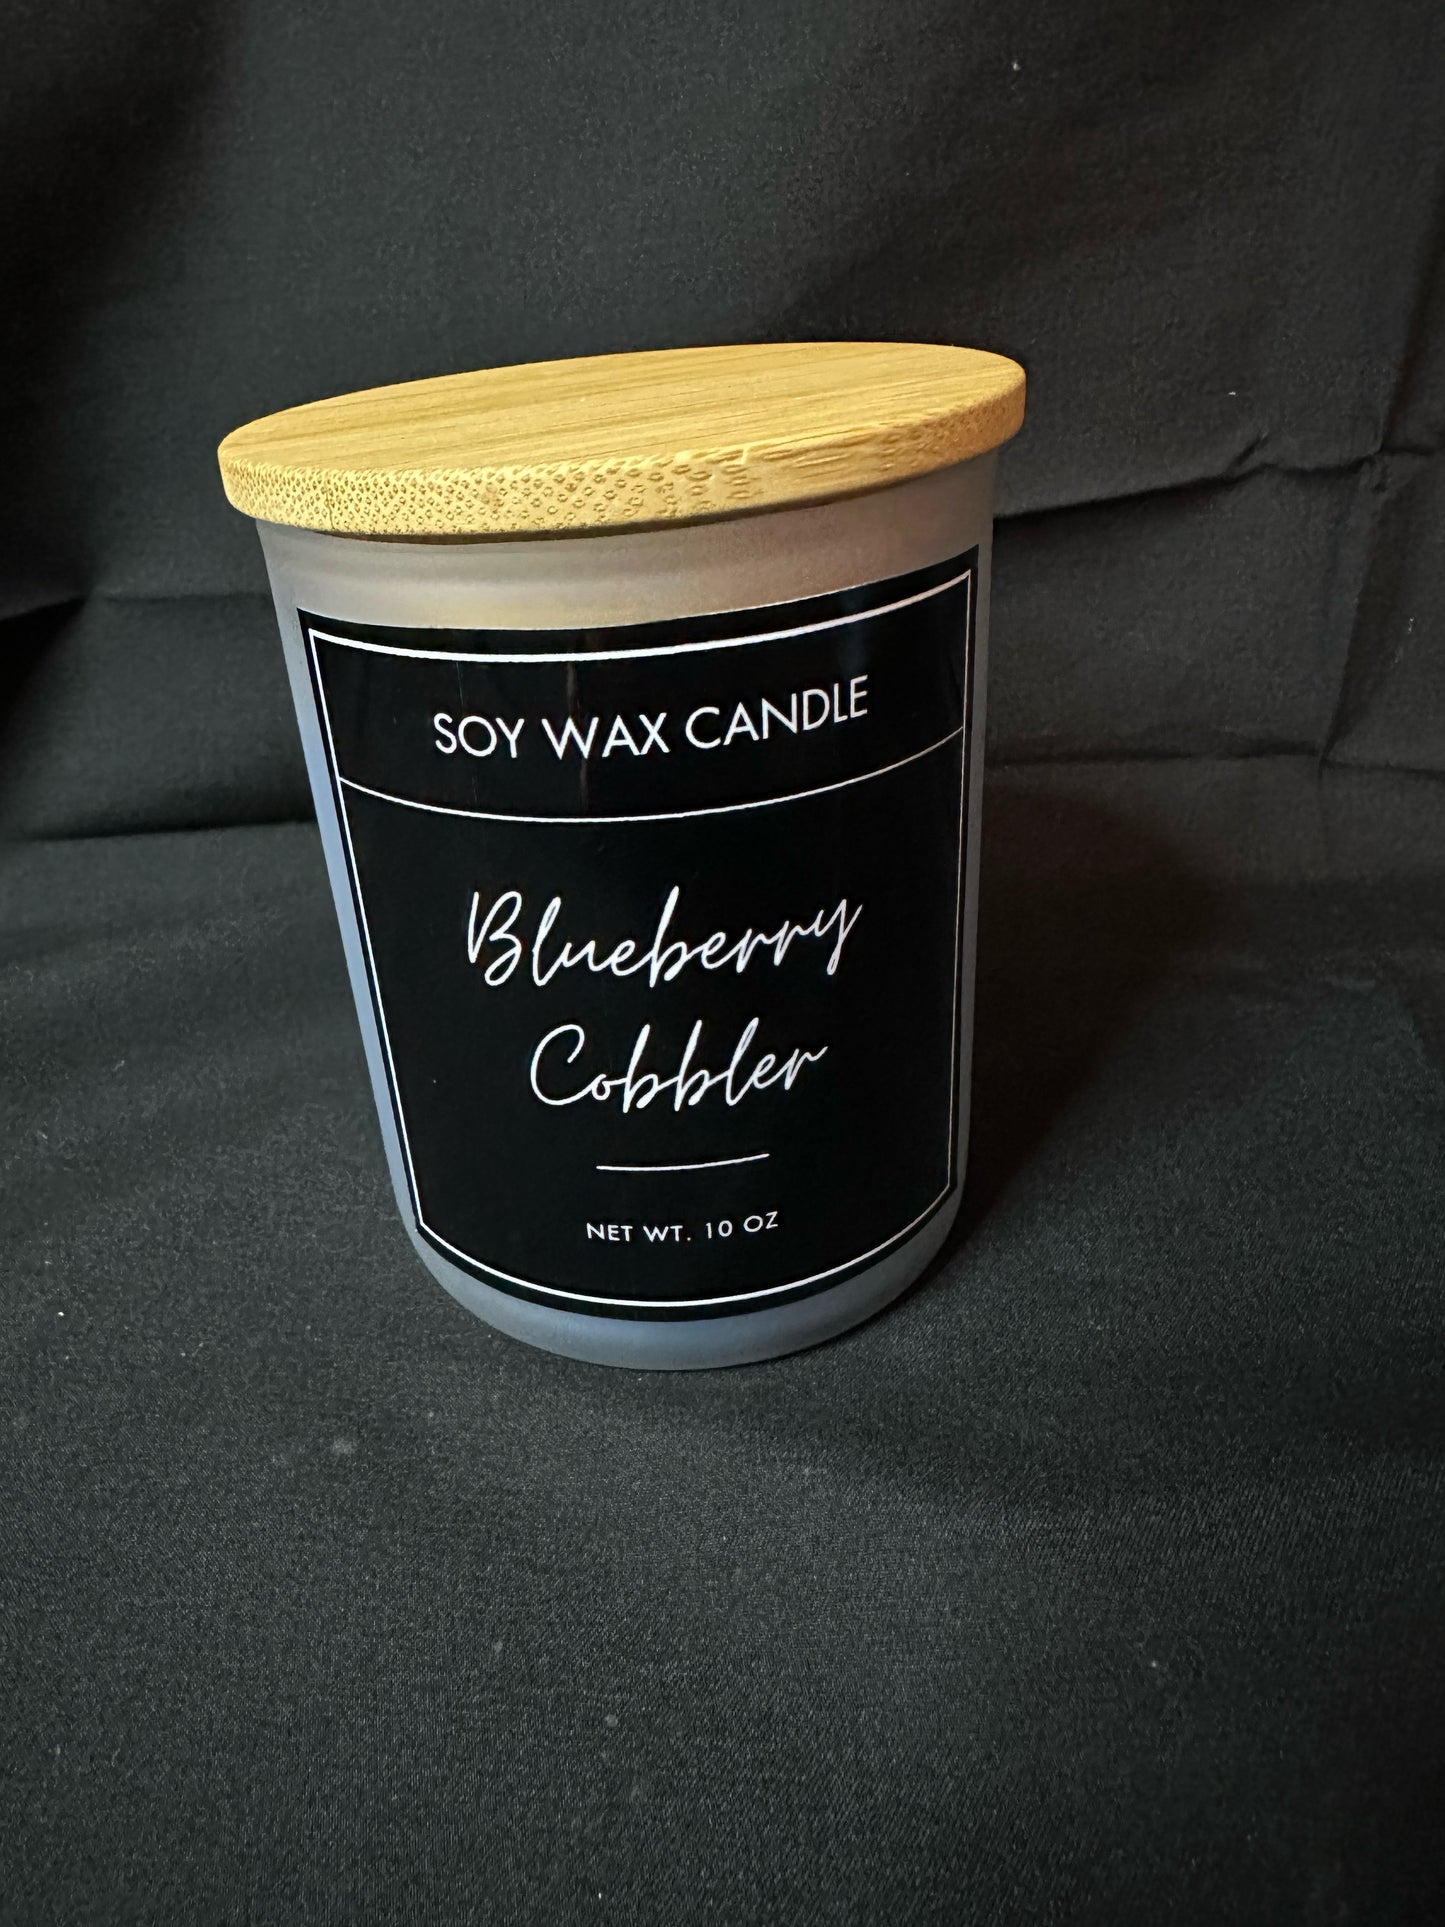 Blueberry Cobbler candle